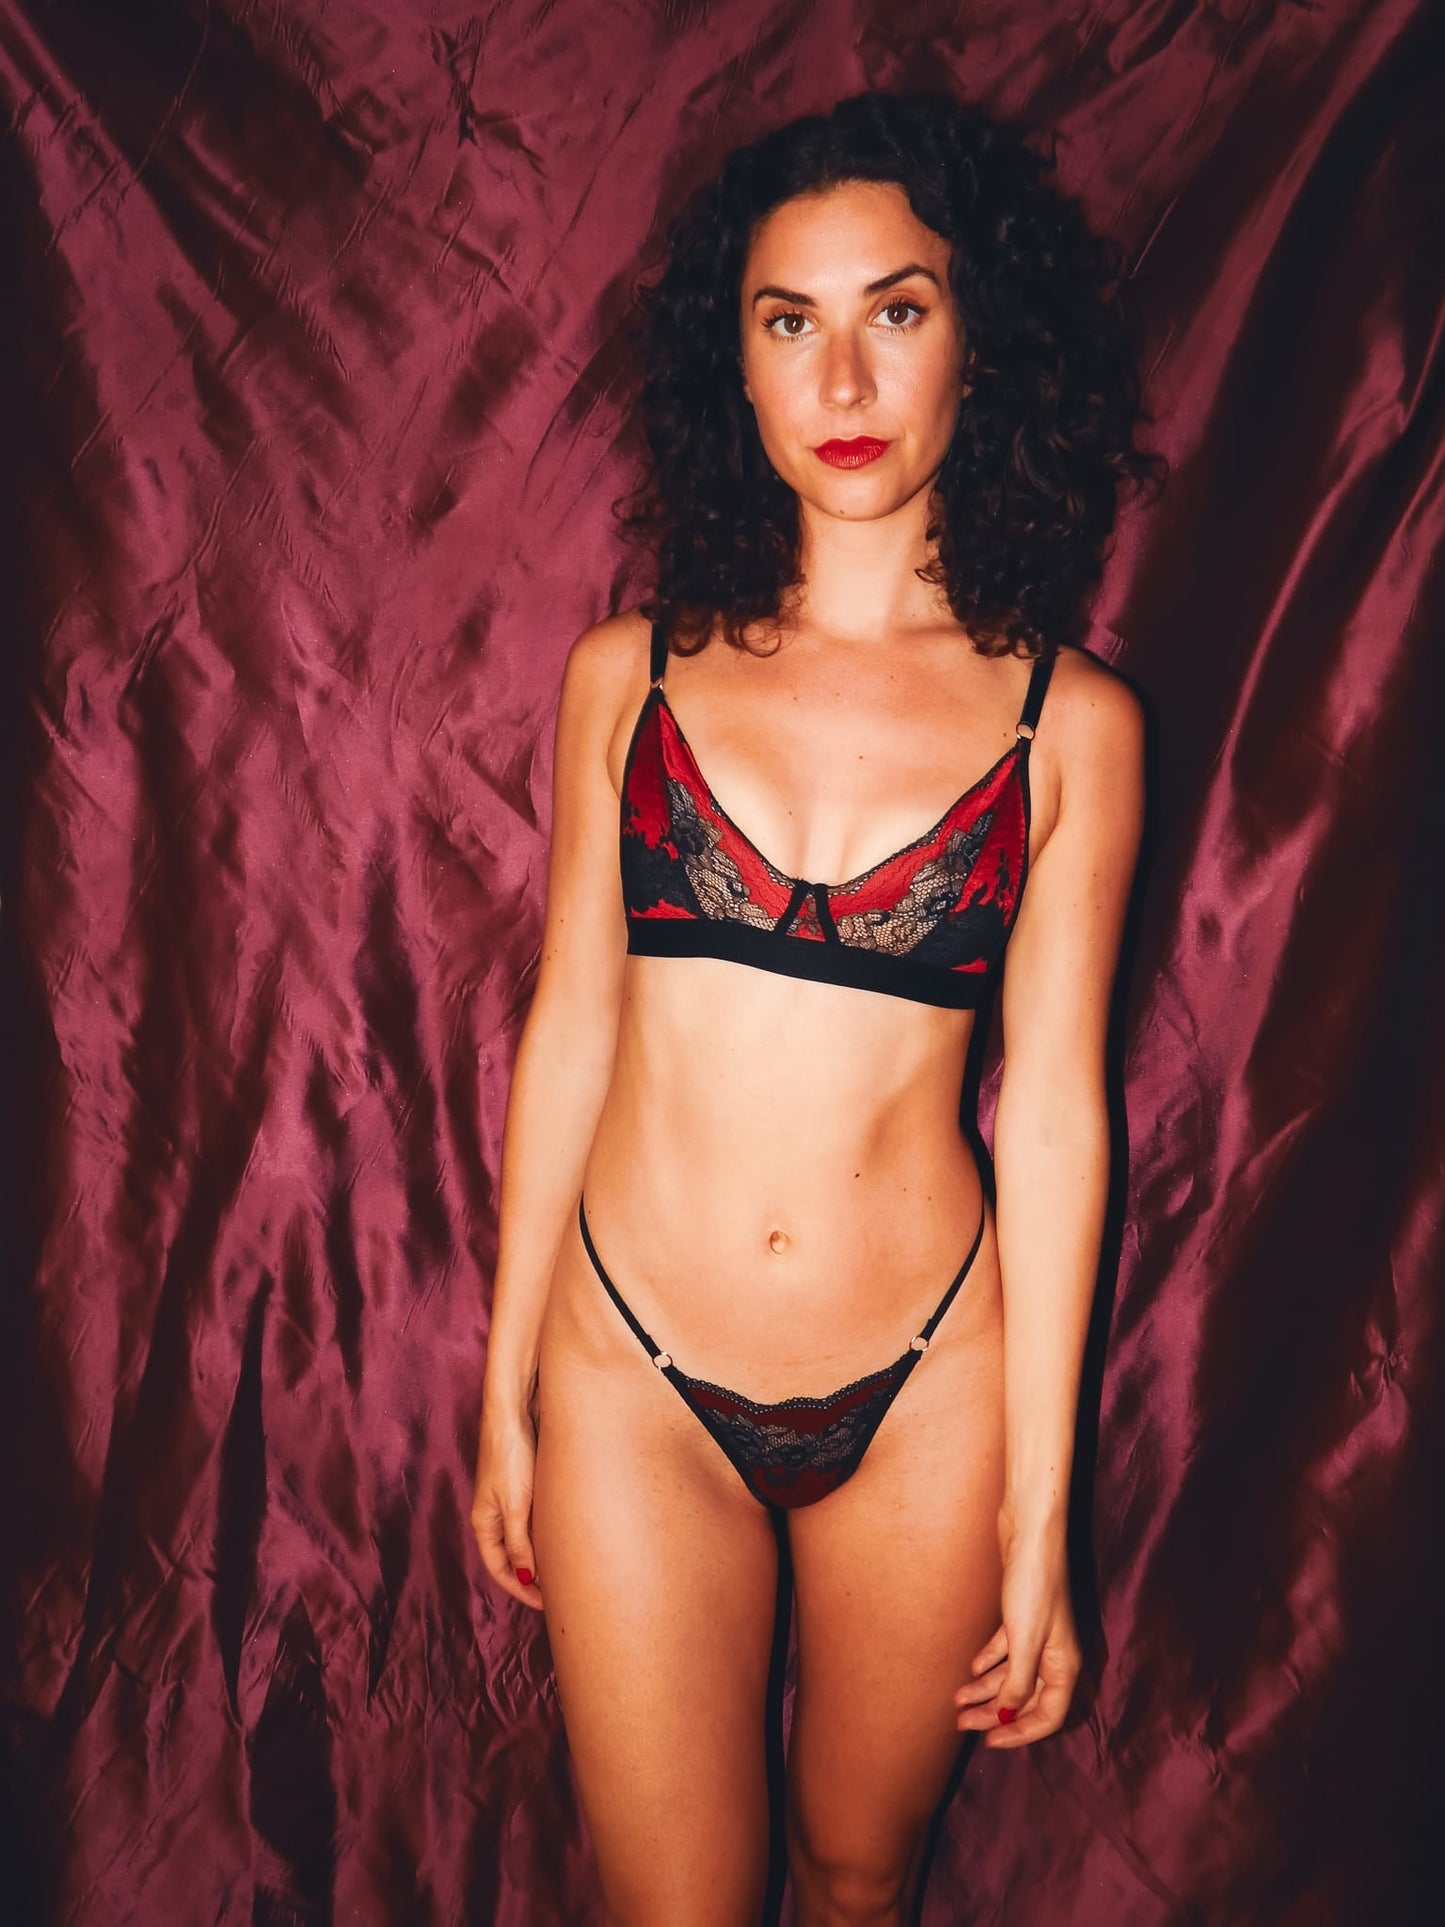 woman posing against red backdrop in black and red lace bralette